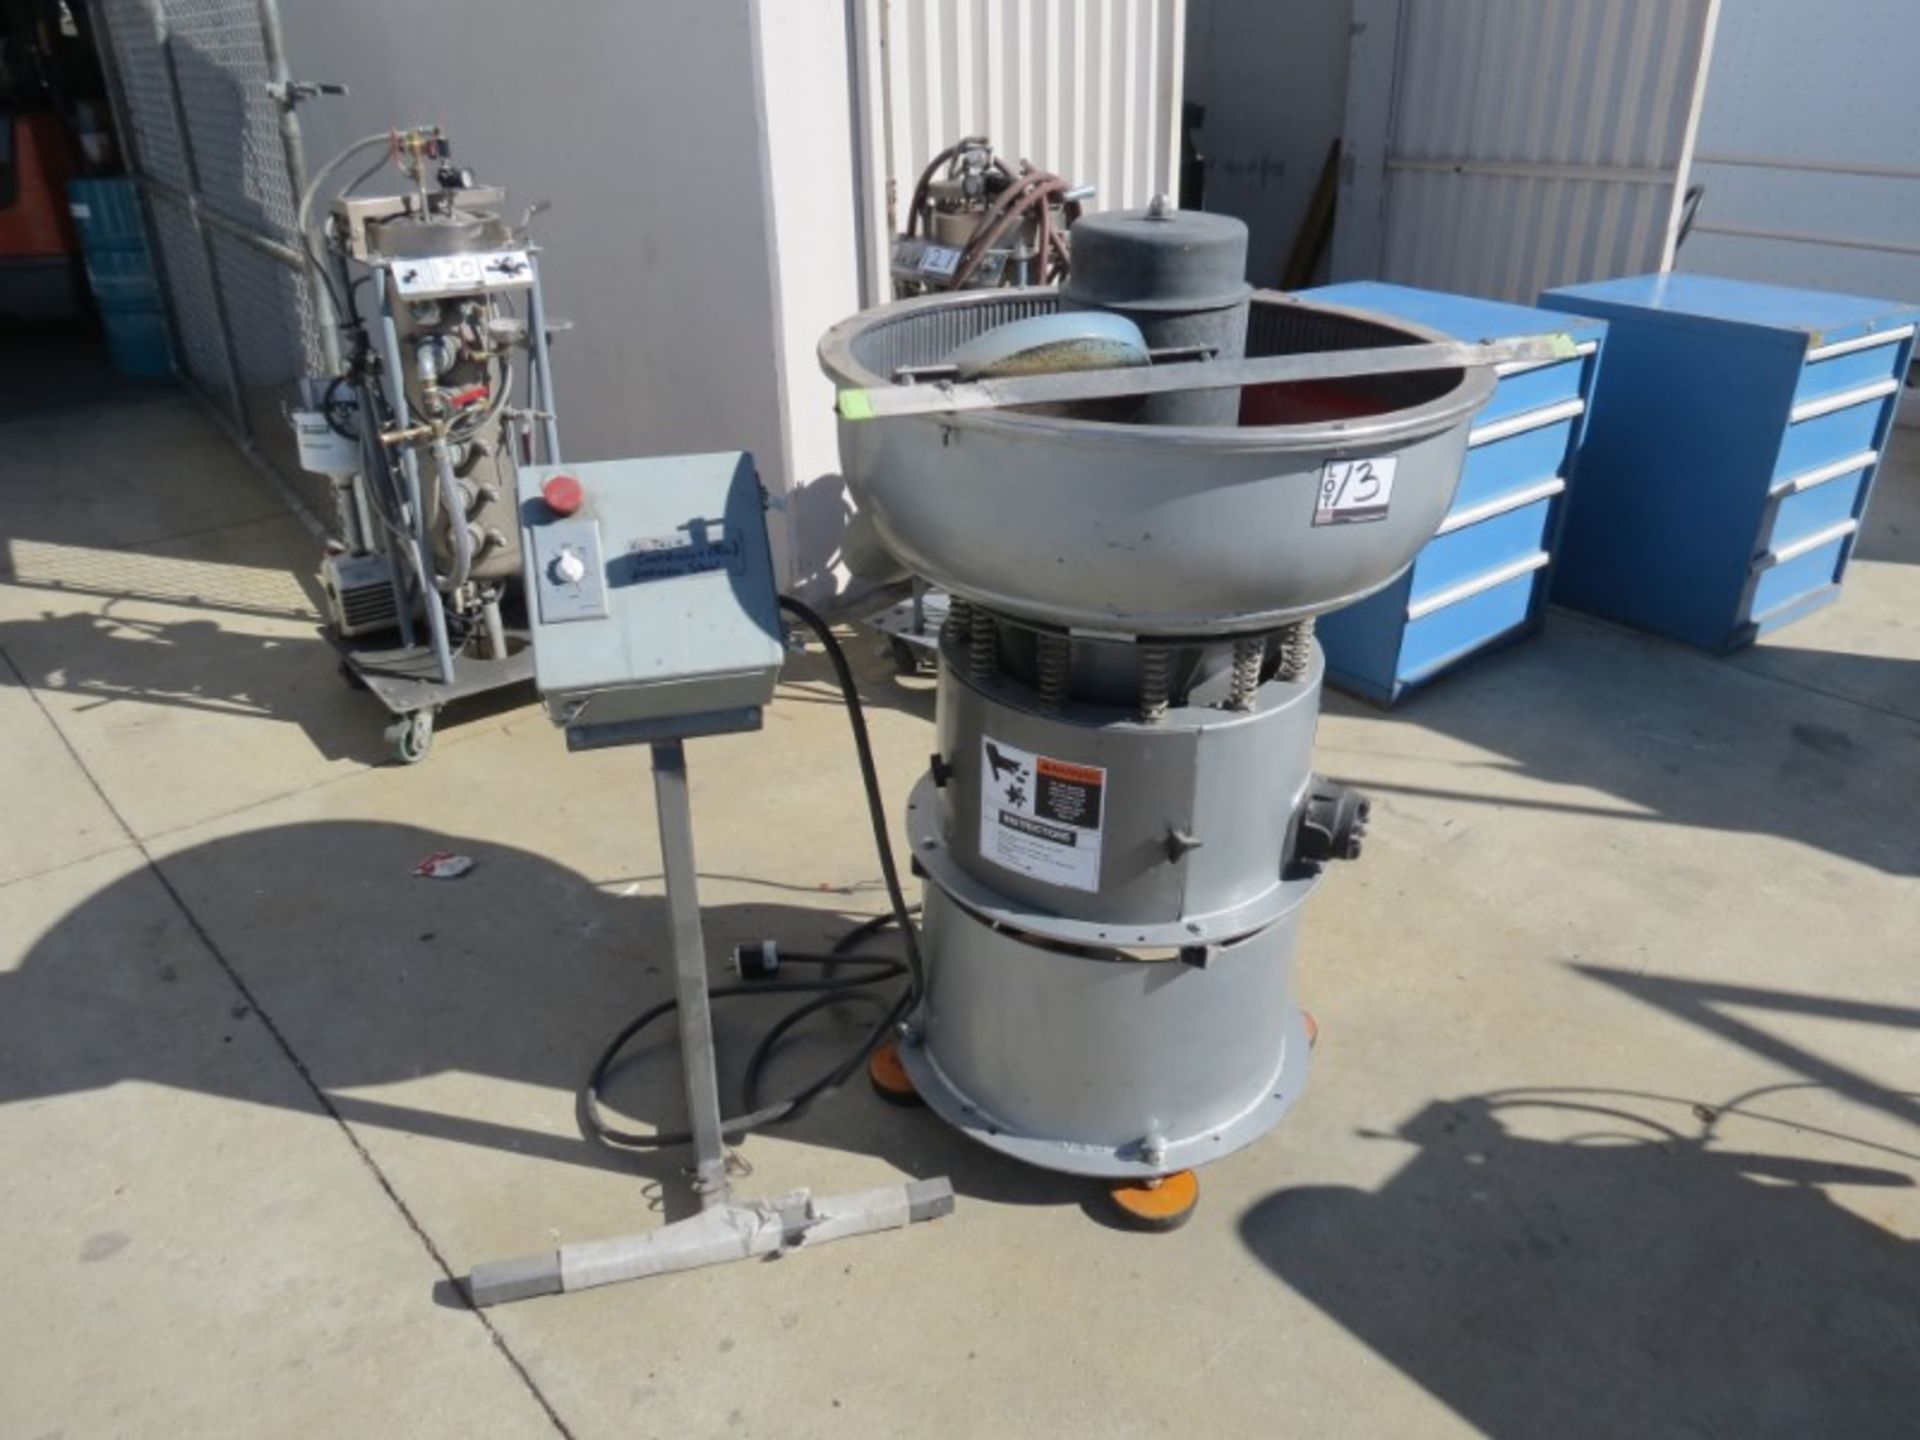 Sweco Vibro-Energy FM-3 Vibratory Deburrer, s/n FM-1161-15 (Moved Outside for Photos) - Image 2 of 4